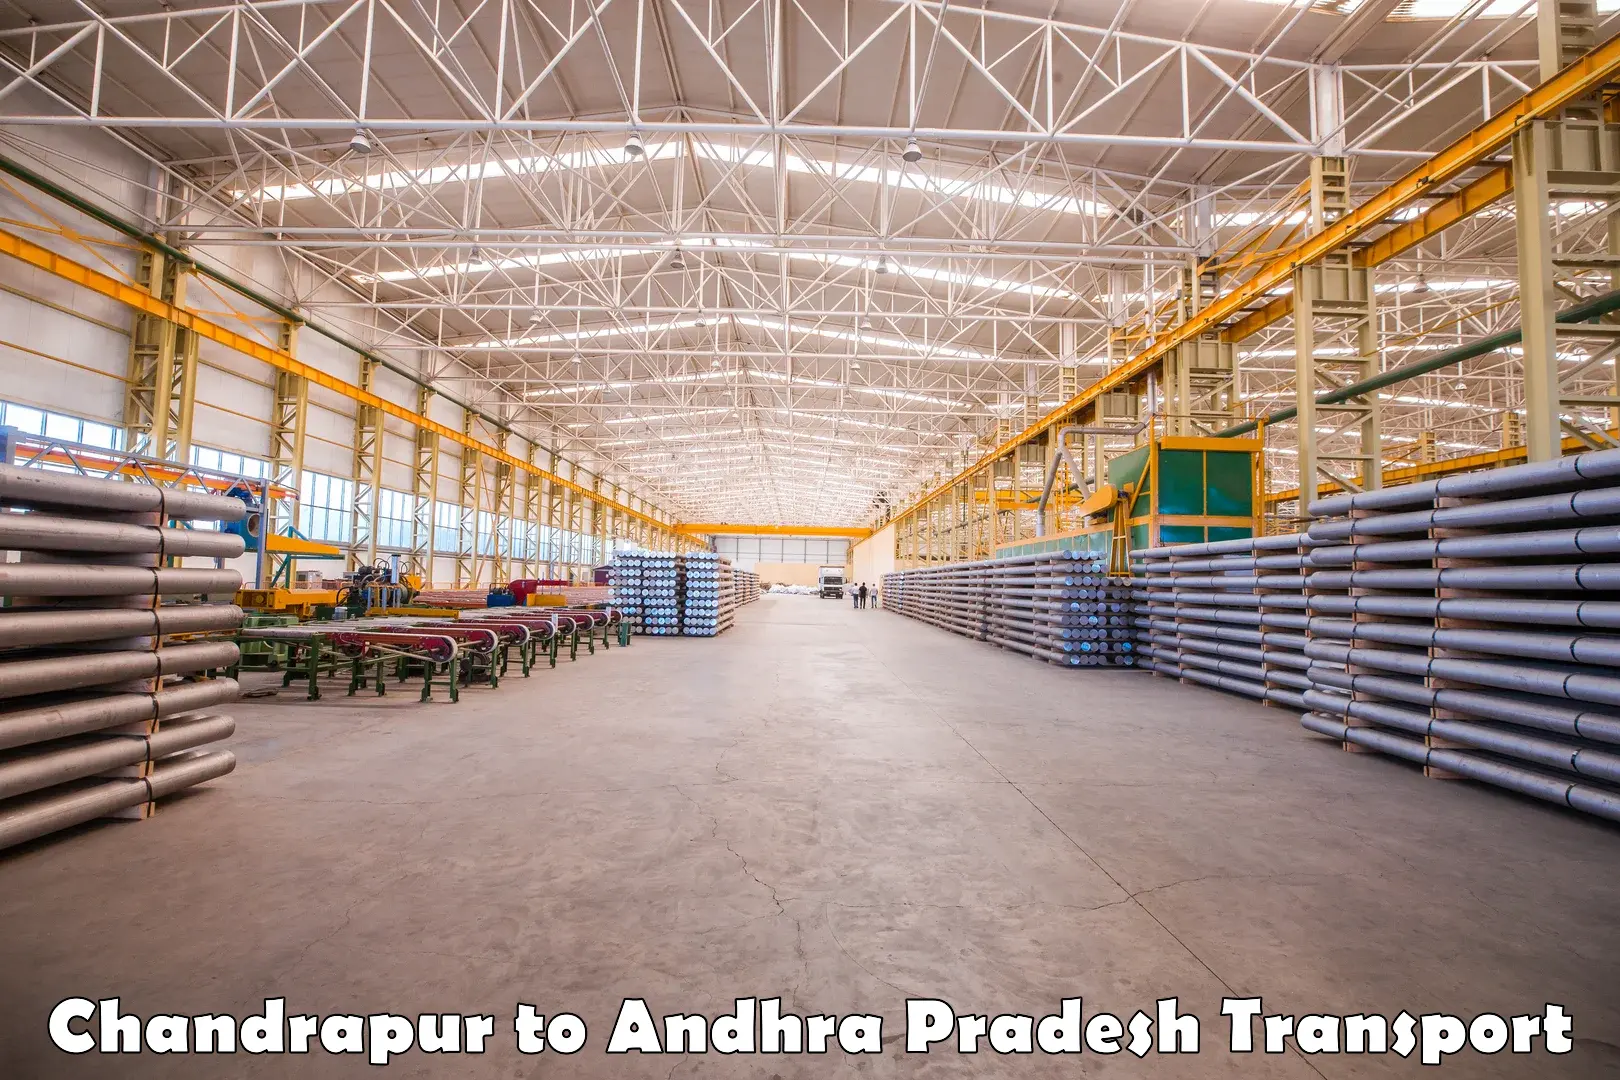 Truck transport companies in India Chandrapur to Pathapatnam